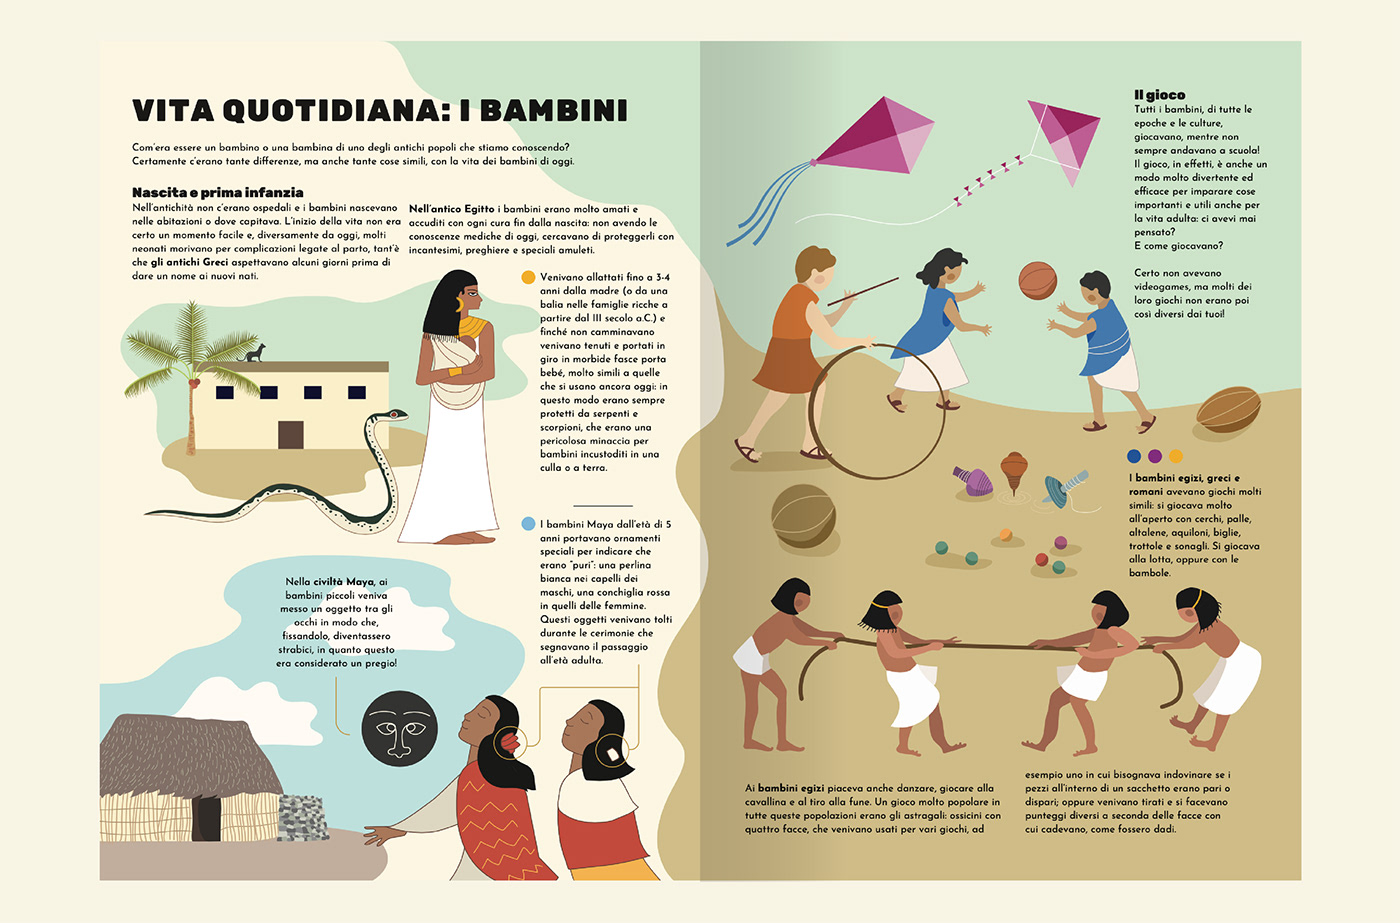 childrens book Education history infographic national geographic kids ancient greece egypt egyptian Folklore mythology